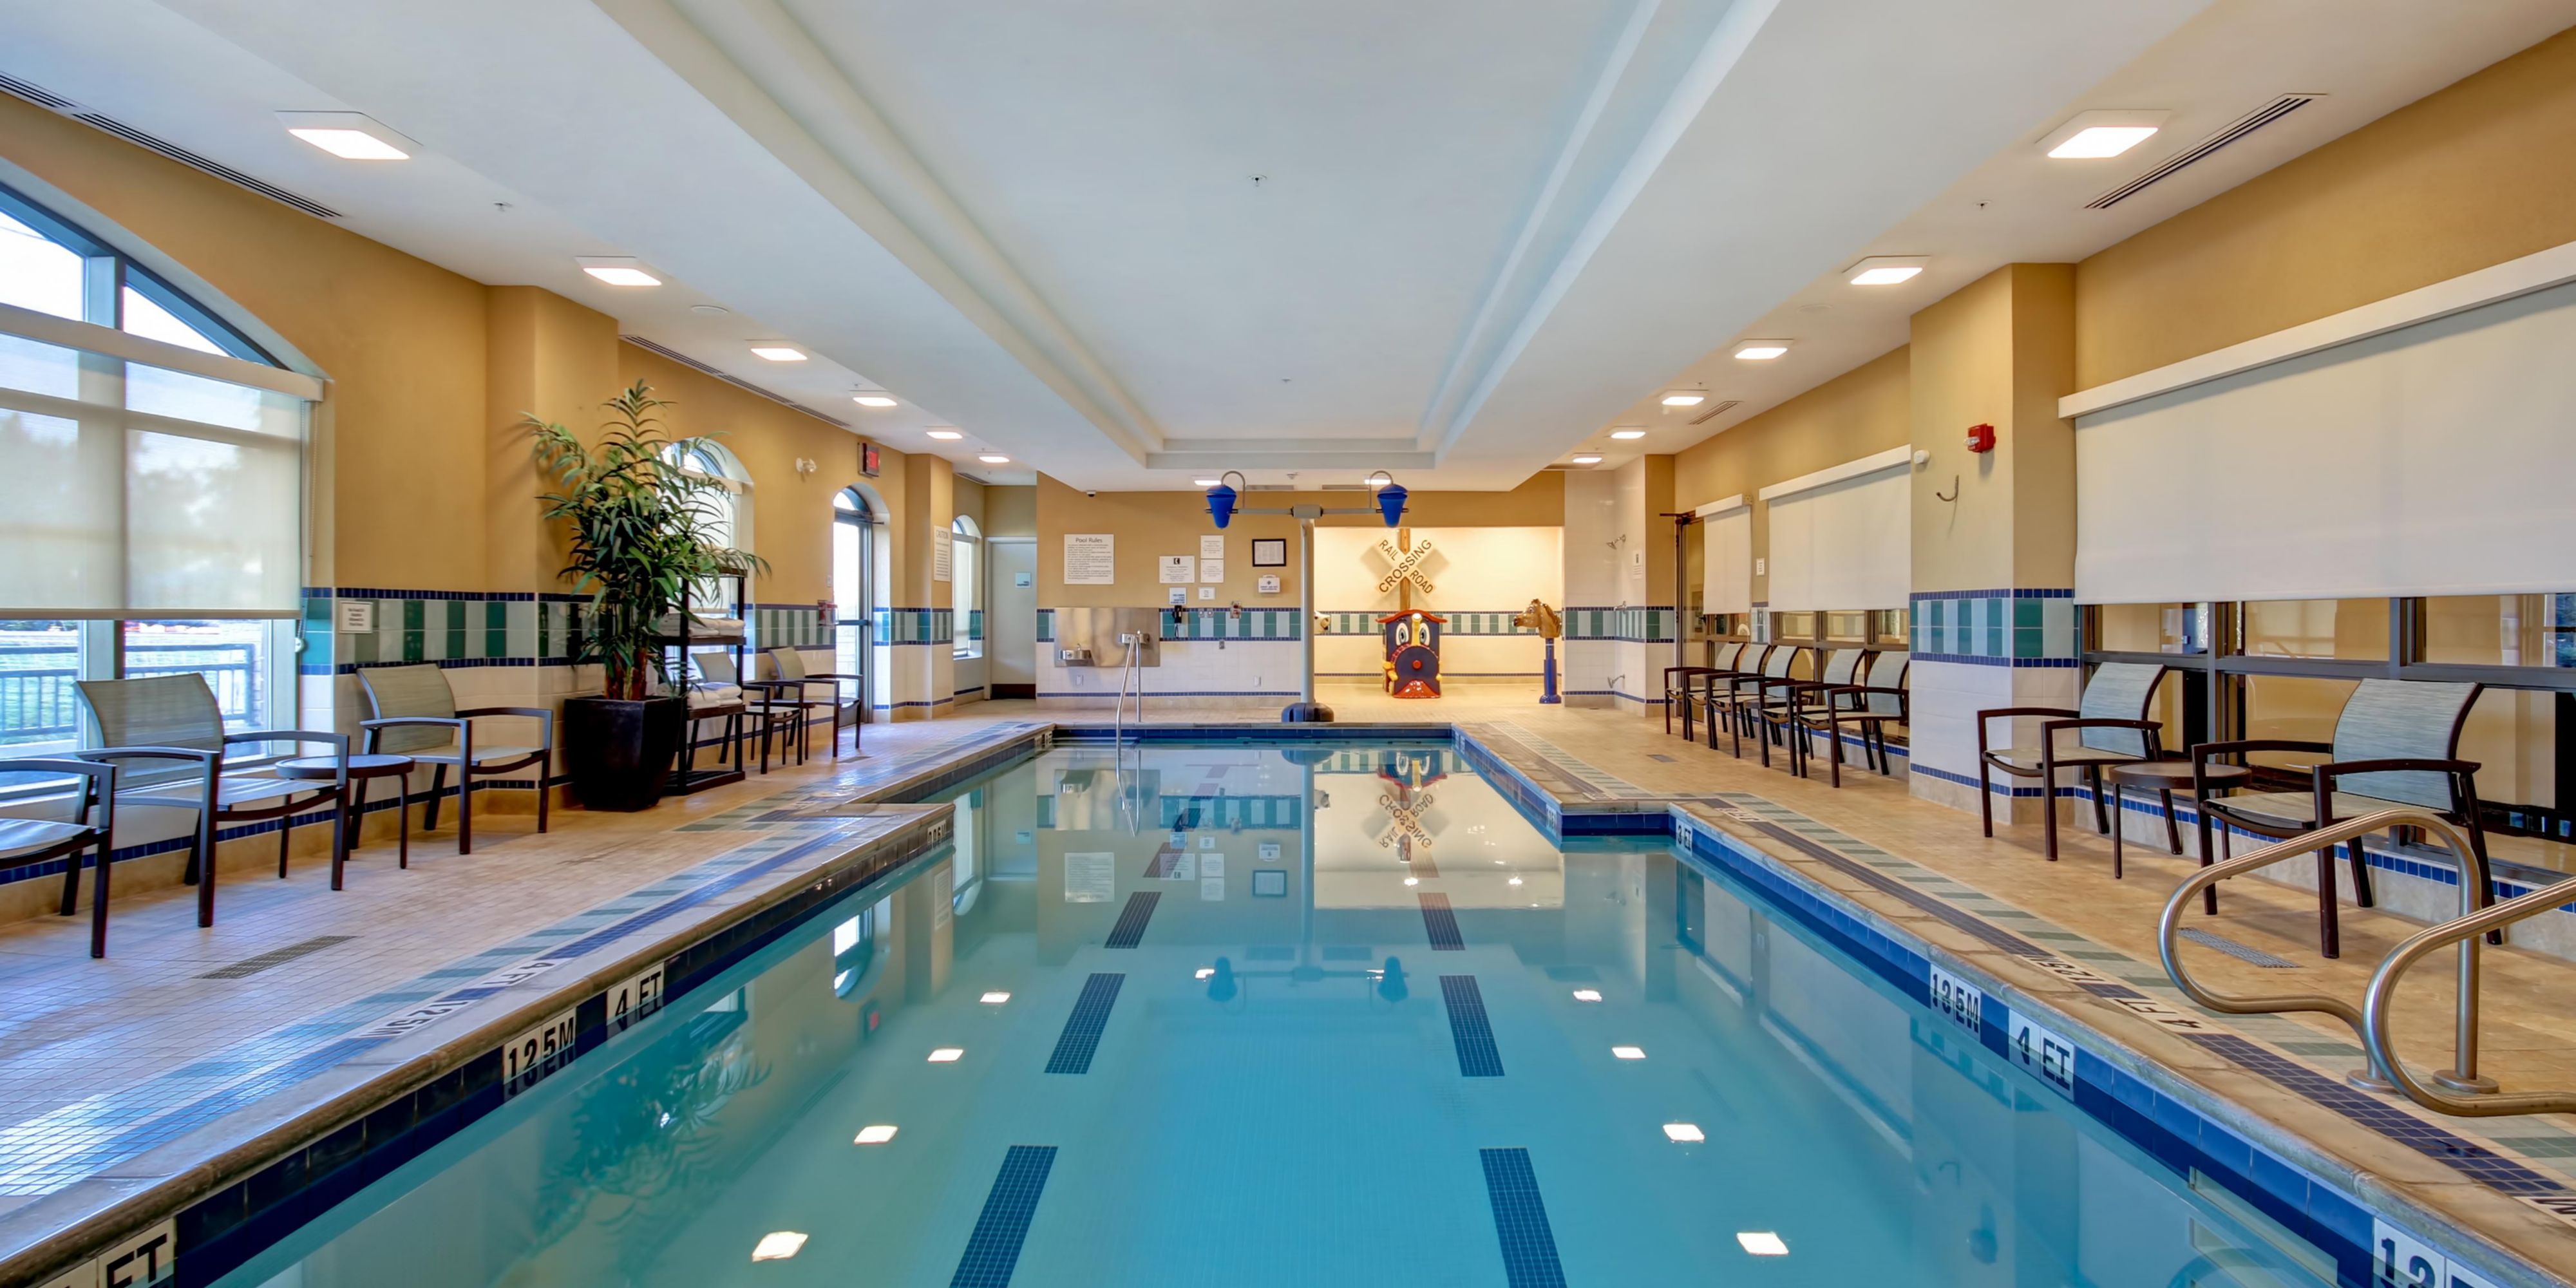 Our Indoor Heated Pool and Splash Pad with Dumping Buckets is perfect for families and open daily from 6:00am-10:00pm. Reservations are required.